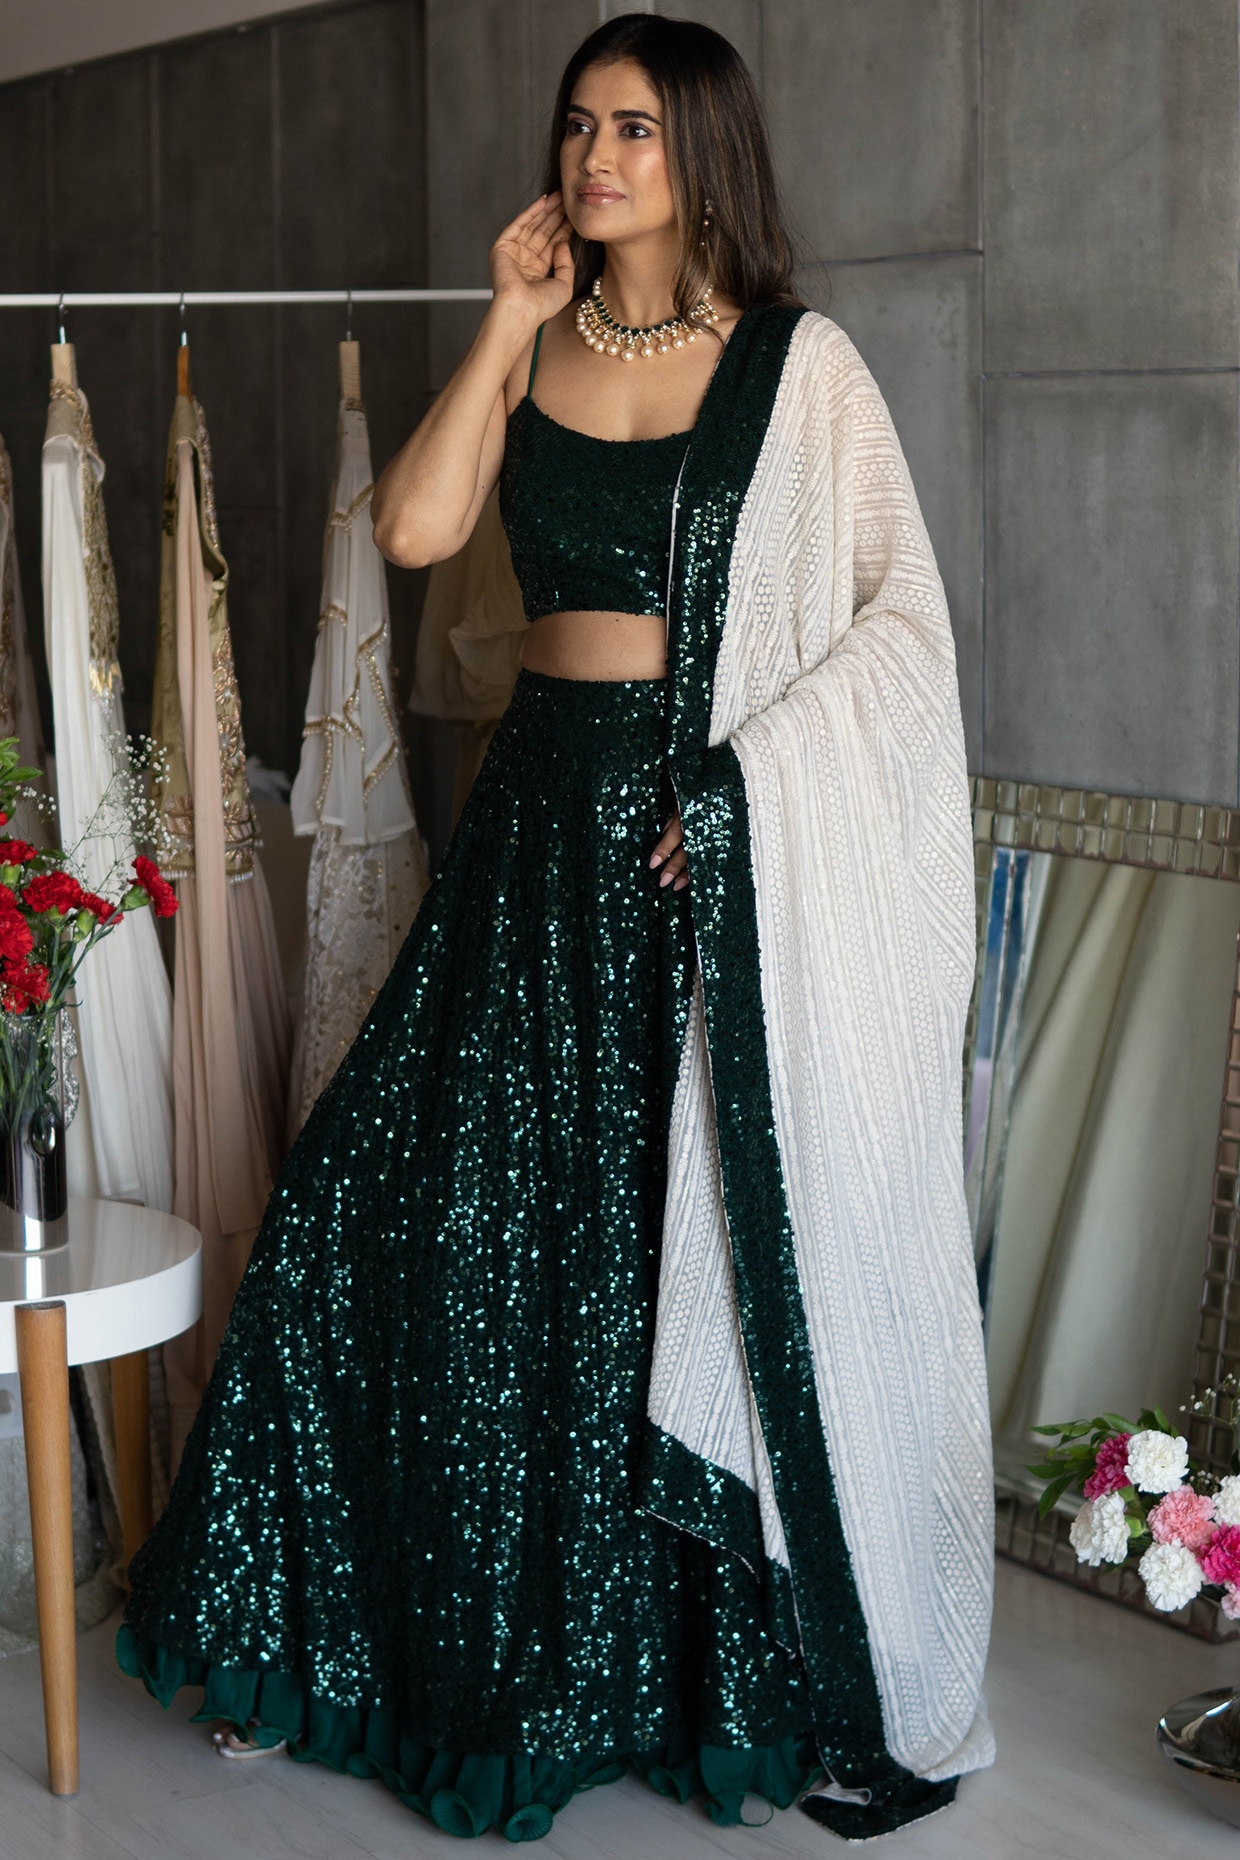 Olive Green & Silver Printed Ready to Wear Lehenga Blouse With Dupatta,  Indo Western Set for Women, Indian Wedding Outfit, Lehenga Choli - Etsy